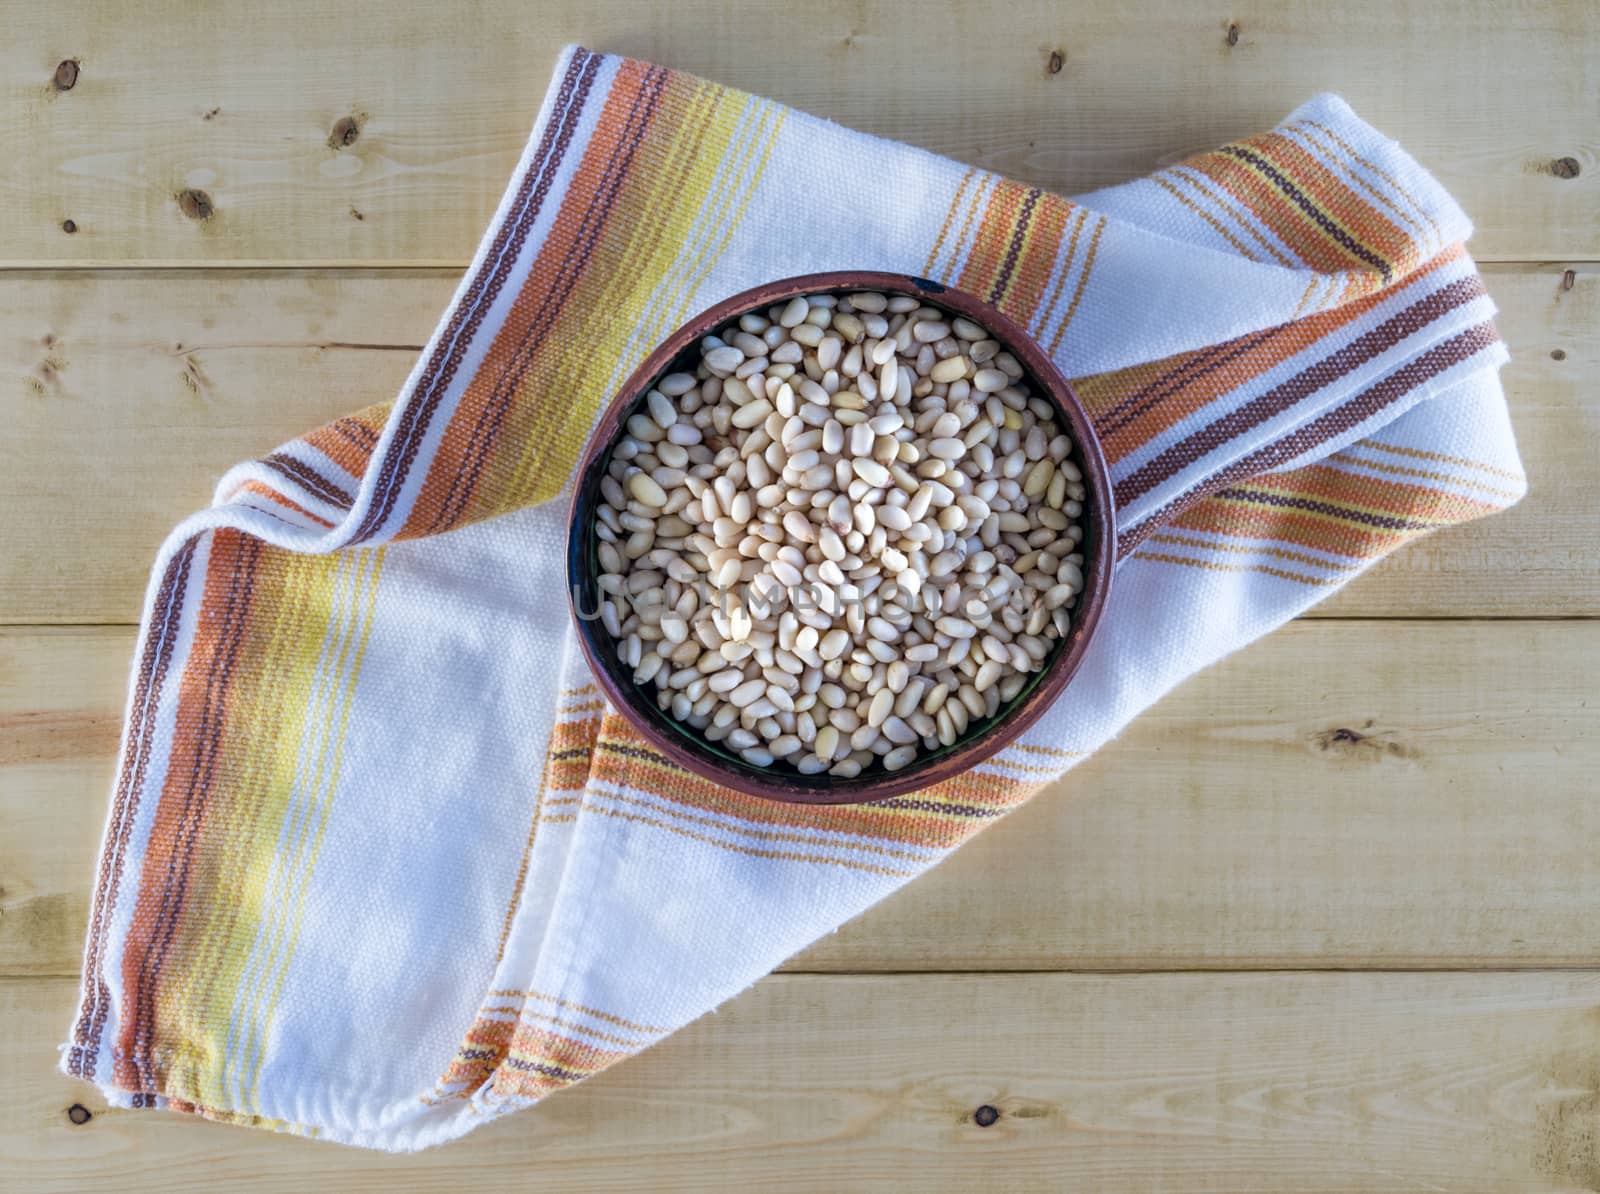 Pine Nuts in Pottery Bowl on Vintage Towel by krisblackphotography